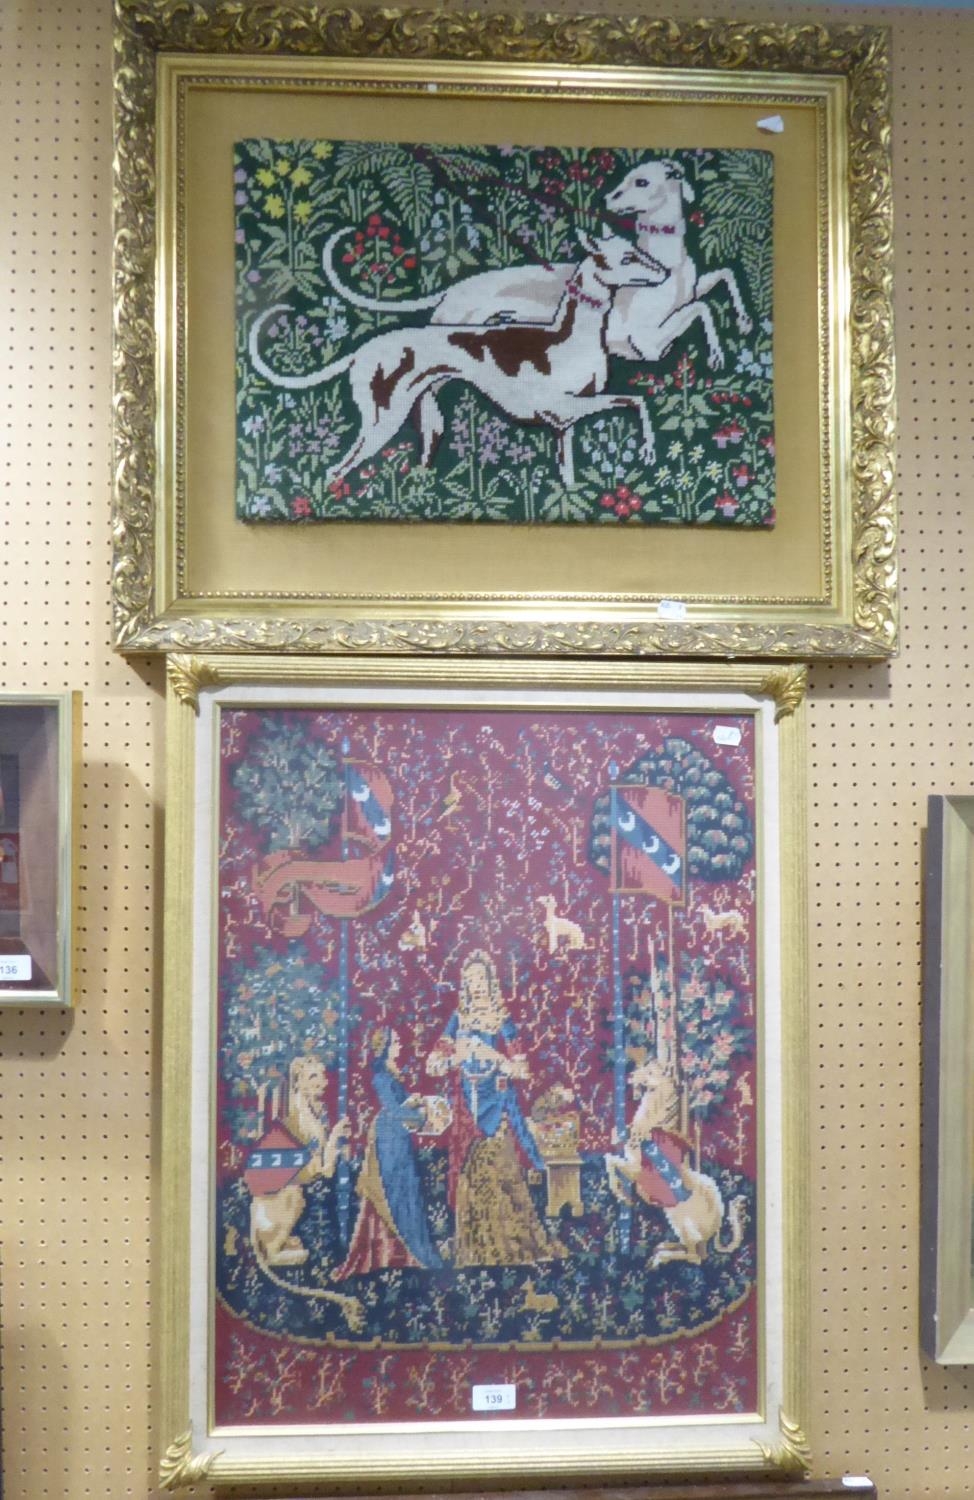 TWO MODERN WOOL WORK PICTURES IN THE MEDIEVAL STYLE Hunting dogs Interior with figures and